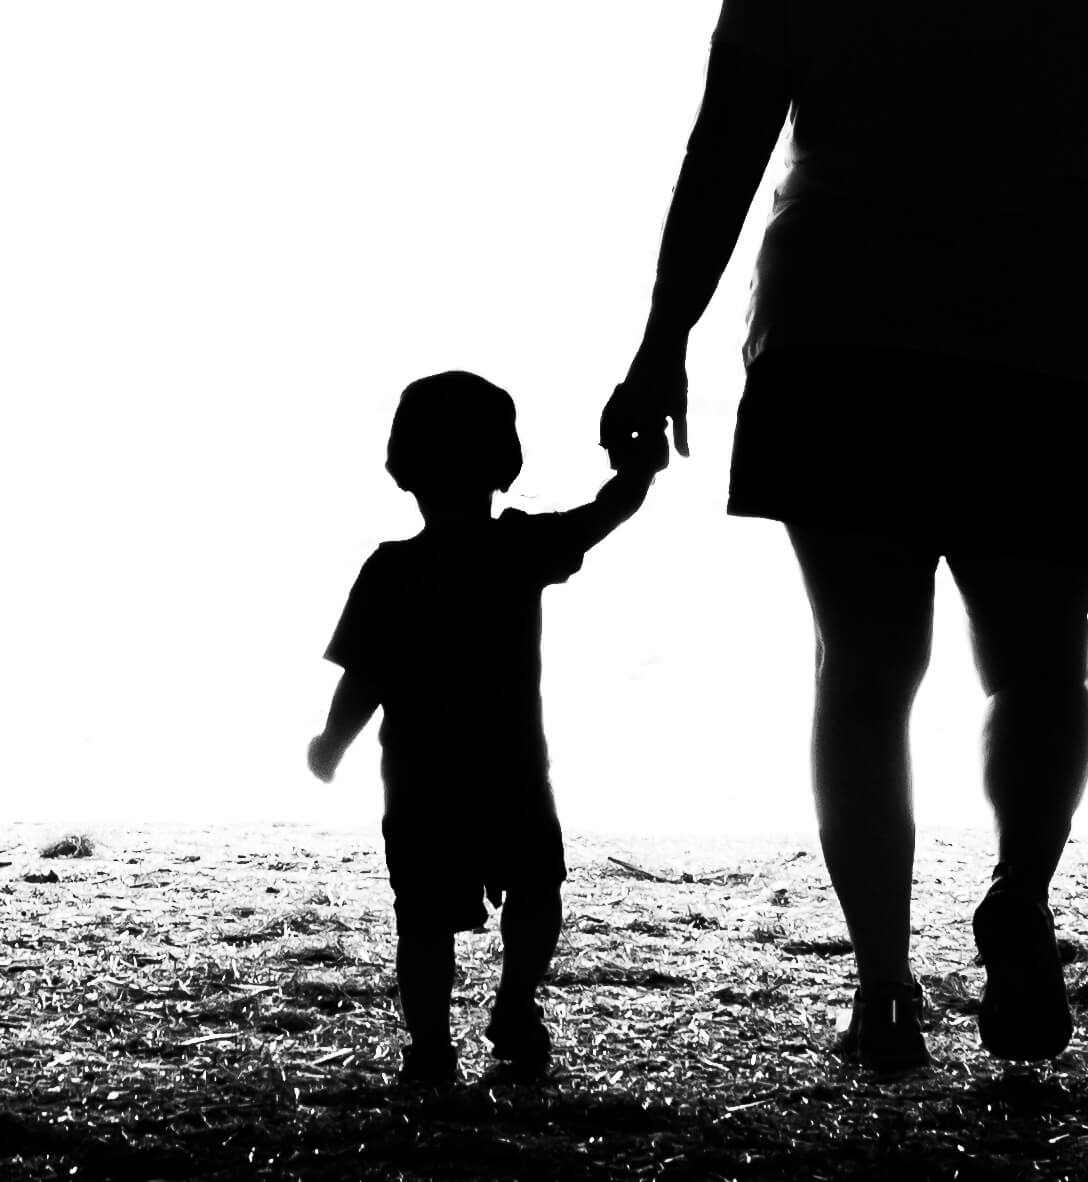 embraced hands of mother and child in silhouette